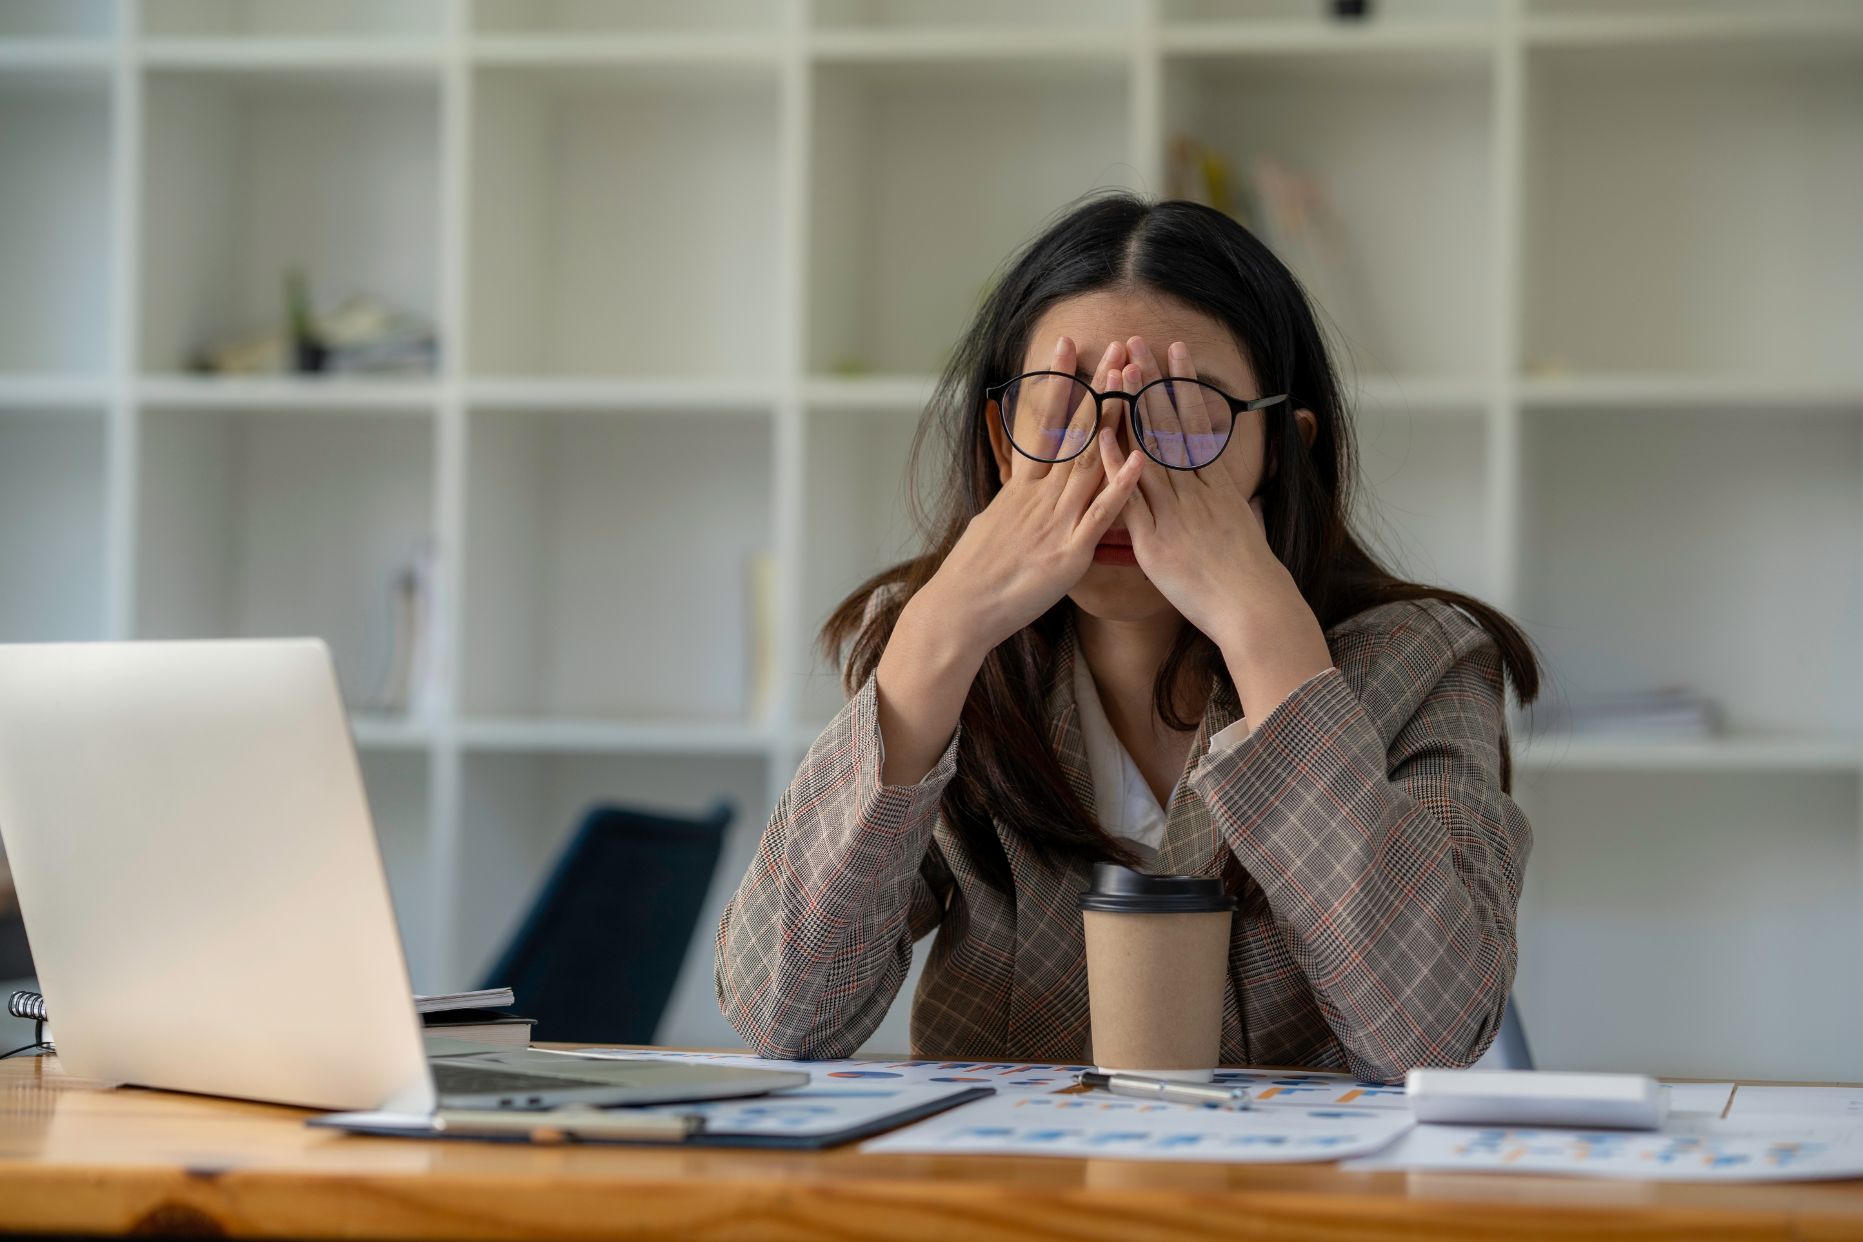 Business woman working at desk upset with hand over her eyes